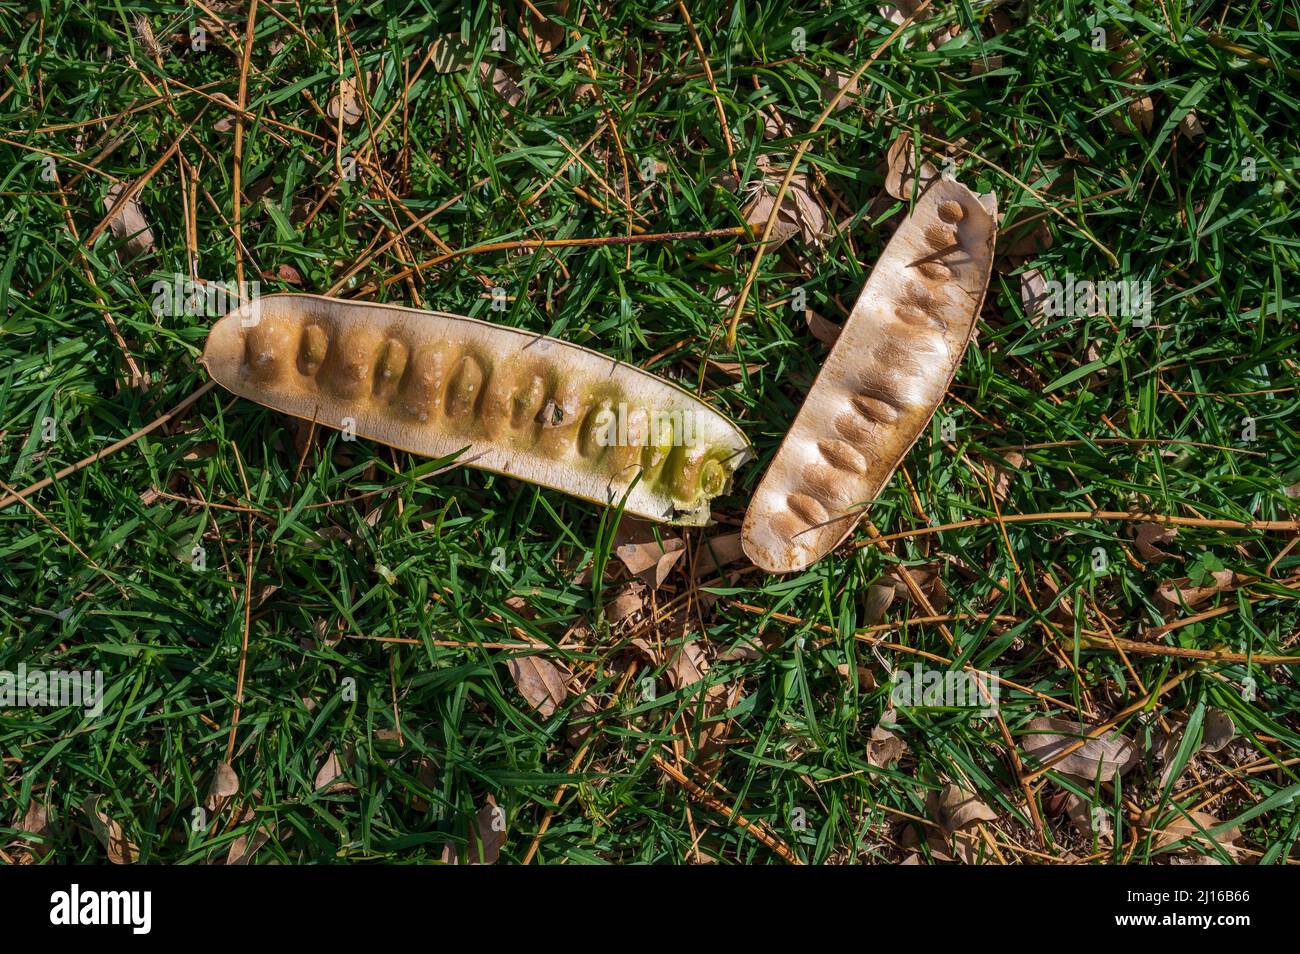 The pod from the Albizia lebbeck tree is brown and long with seeds inside lies on the green grass. View from above. Stock Photo